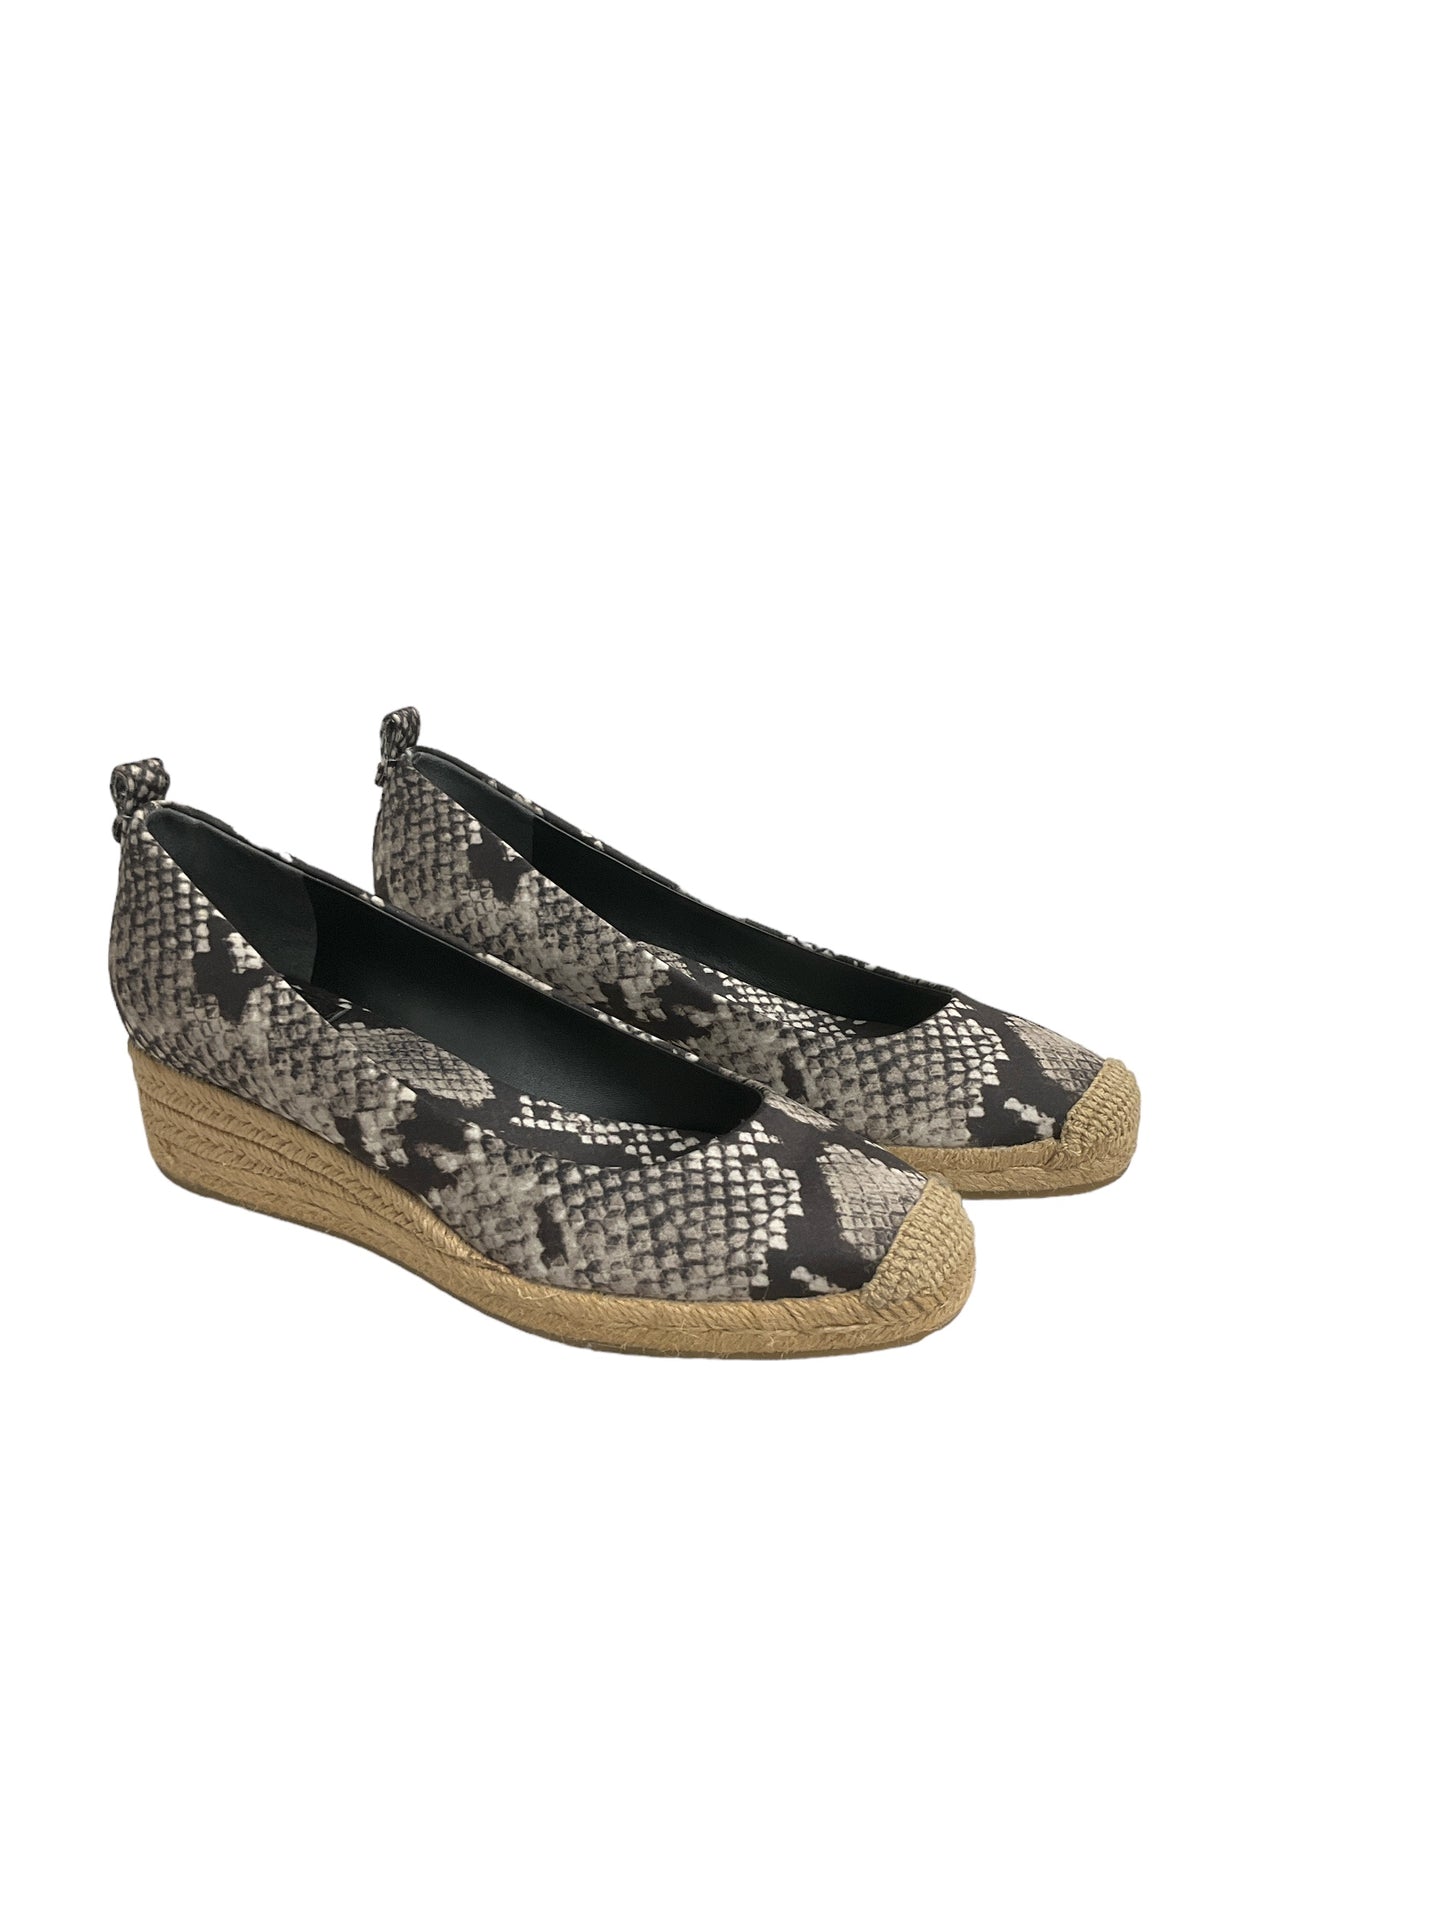 Shoes Heels Espadrille Wedge By Tory Burch  Size: 7